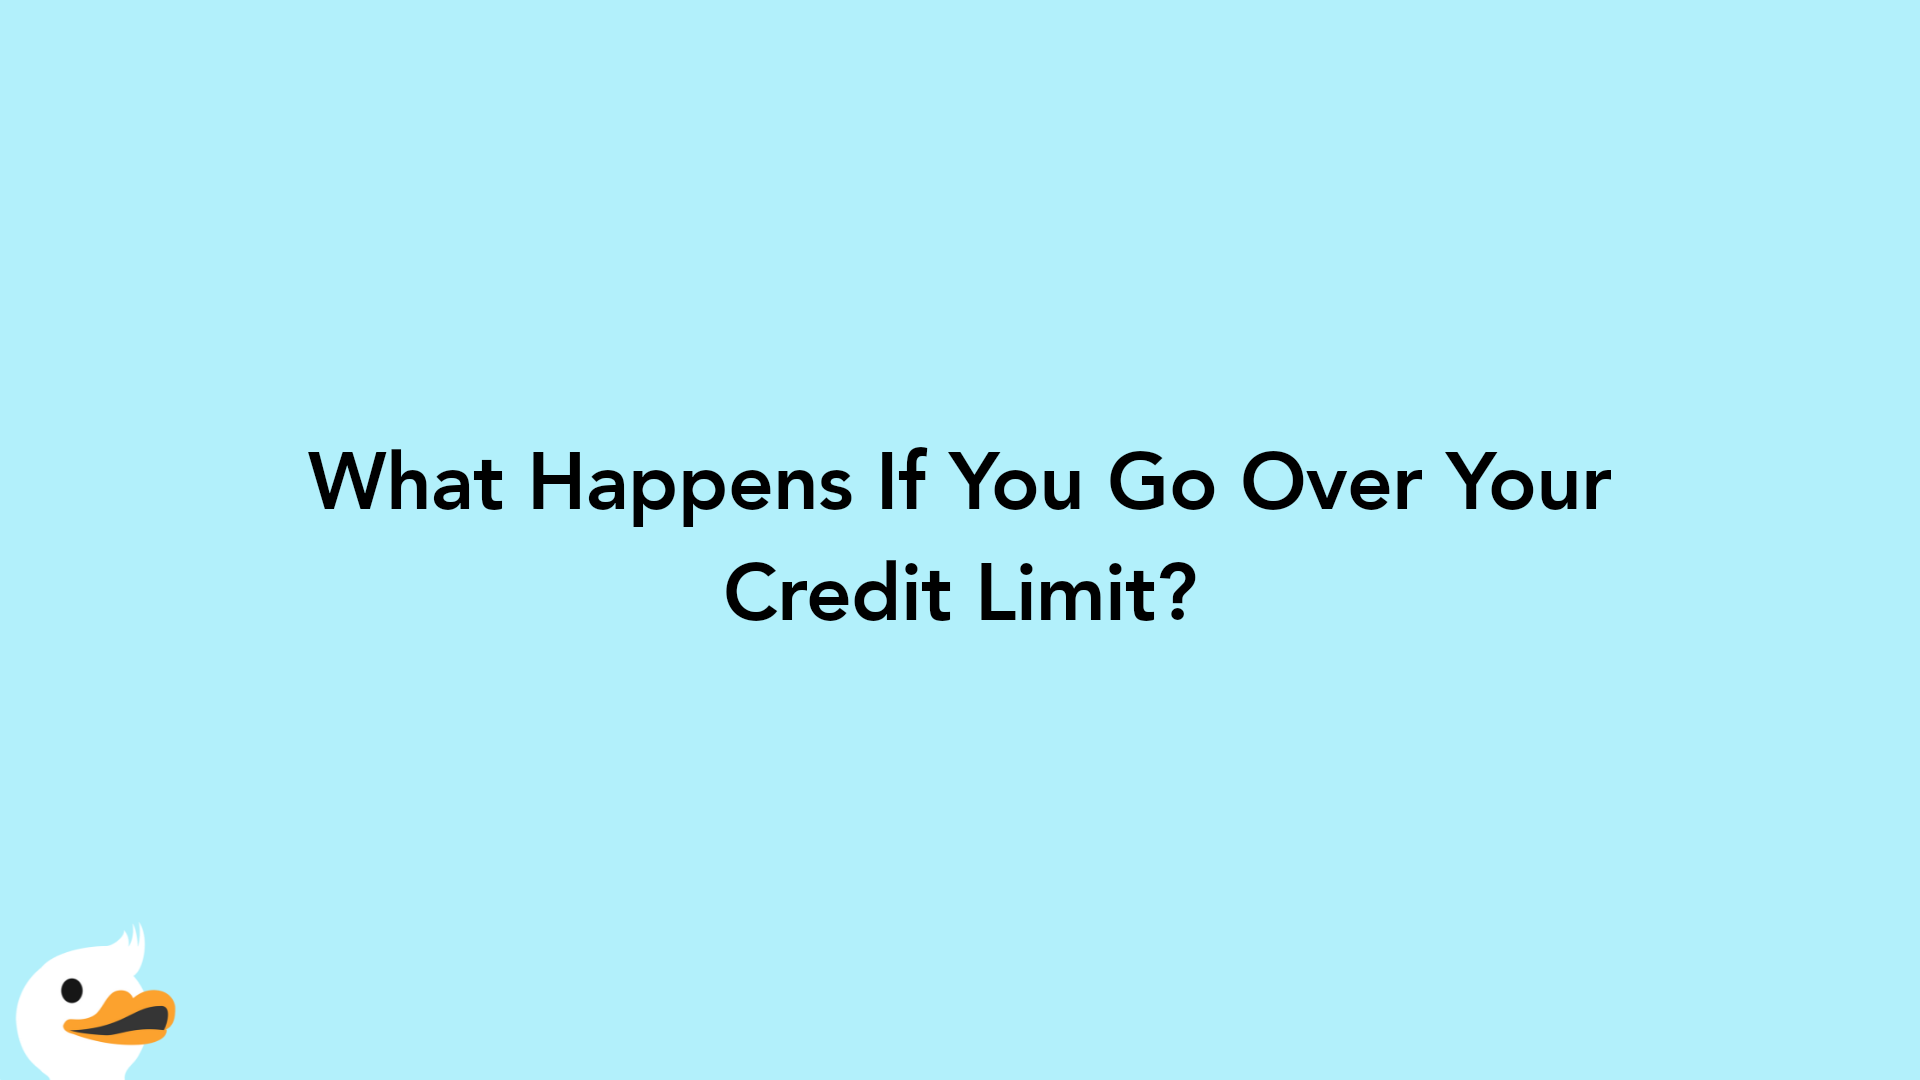 What Happens When You Go Over Your Credit Limit?